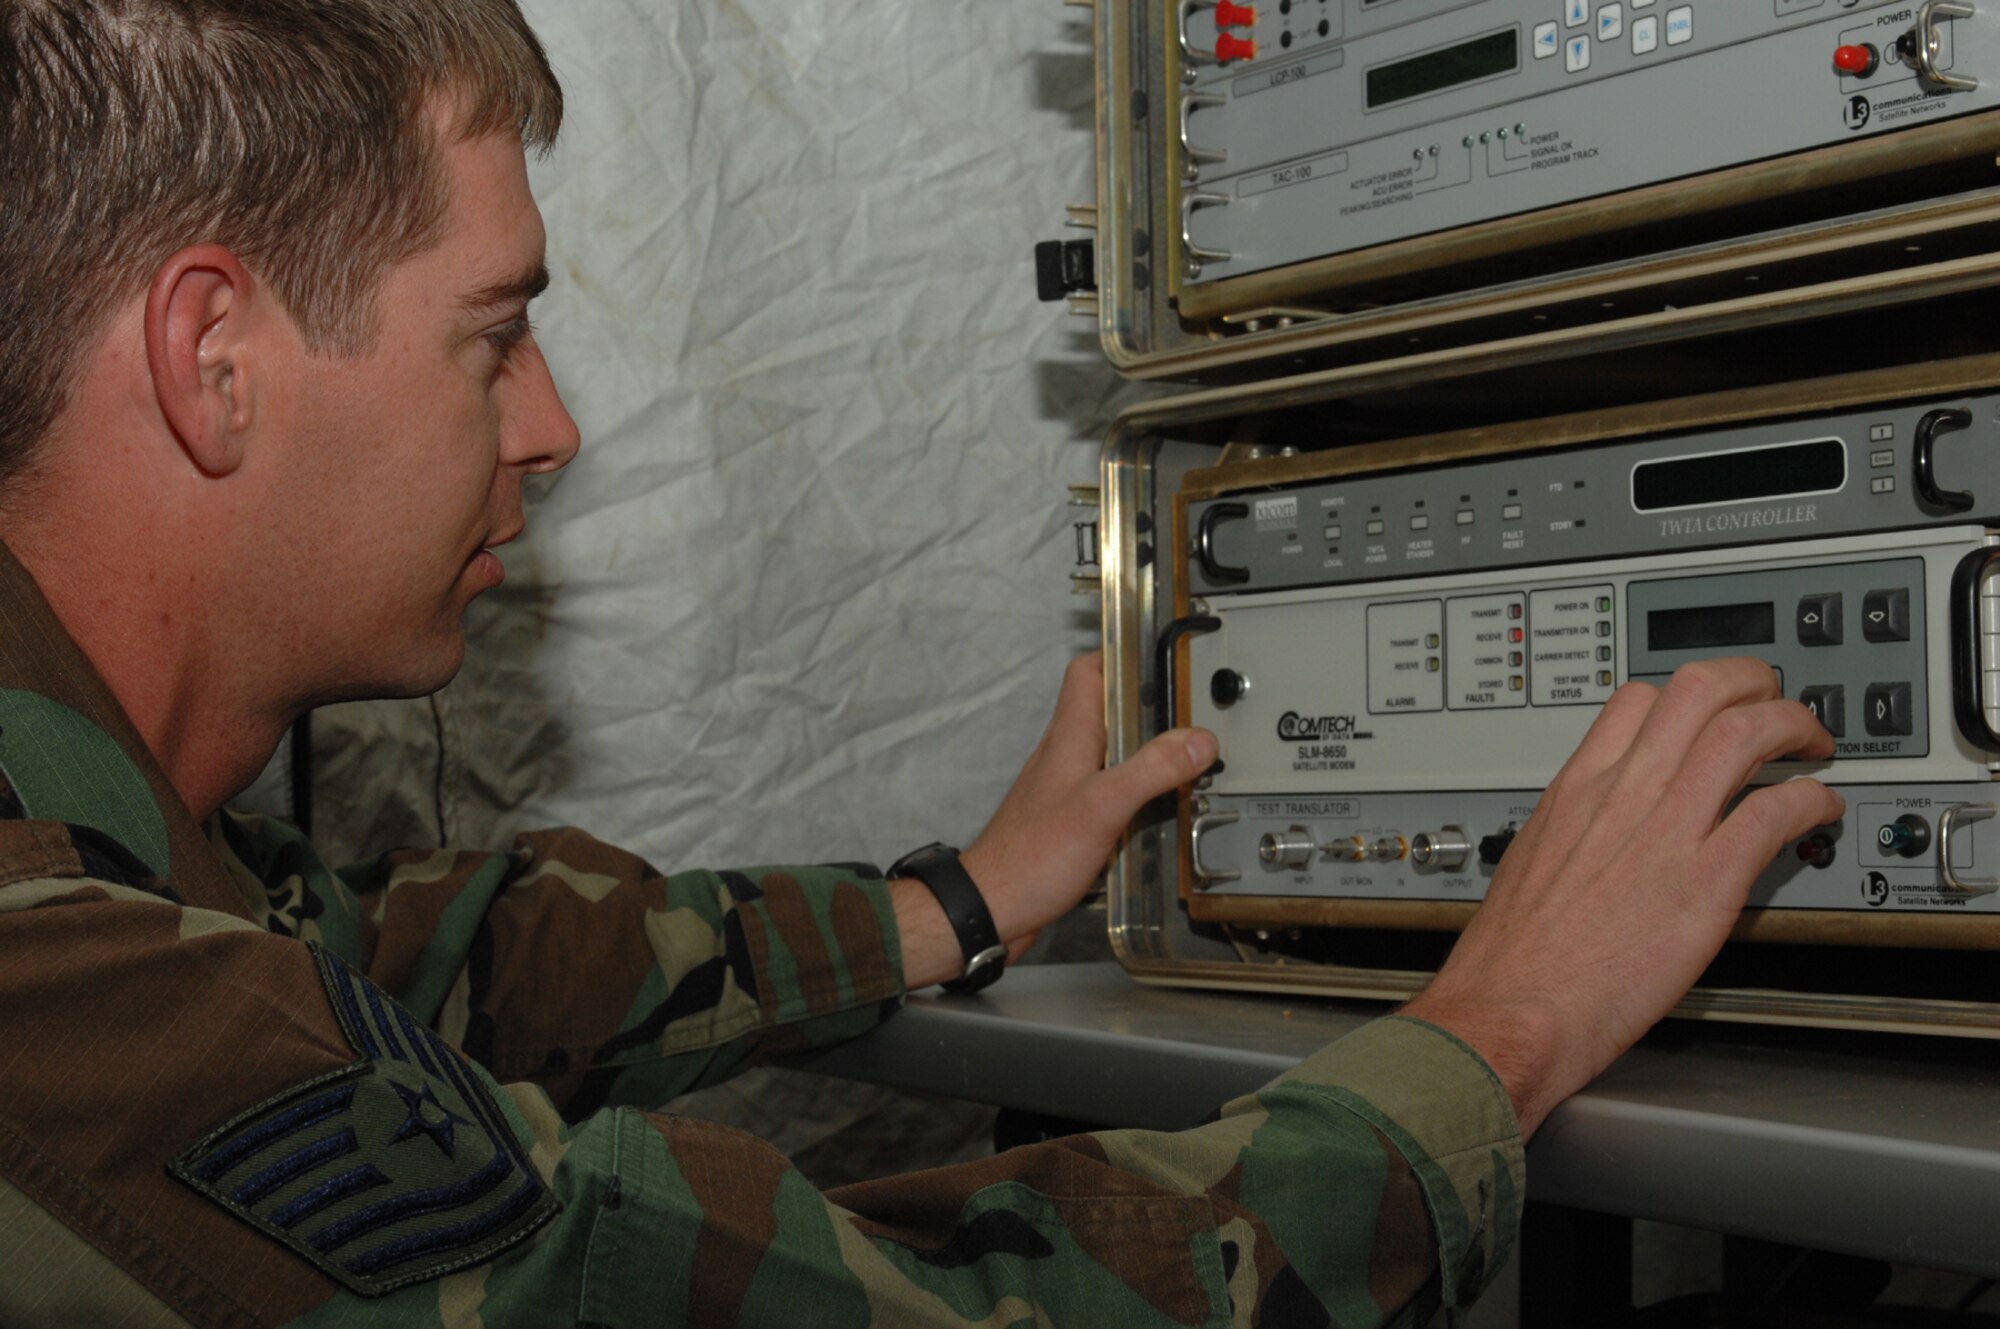 DIVULJE TRAINING BASE, Croatia – U.S. Air Force Tech. Sgt. Brett Olsen, 1st Combat Communications Squadron, Ramstein Air Base, Germany, adjusts a USC 6 Satellite Modem here April 29. Olsen is part of the forward team supporting Medical Central and Eastern Europe Exercise 2008 (MEDCEUR 08). Seventeen nations are participating in the exercise May 2 through 15. The exercise focuses on mass-casualty training scenarios and humanitarian aid in response to crises situations. More than 400 multi-nationals are attending the exercise in support of the Partnership for Peace initiative. (U.S. Air Force photo/Staff Sgt. Kristin Ruleau)